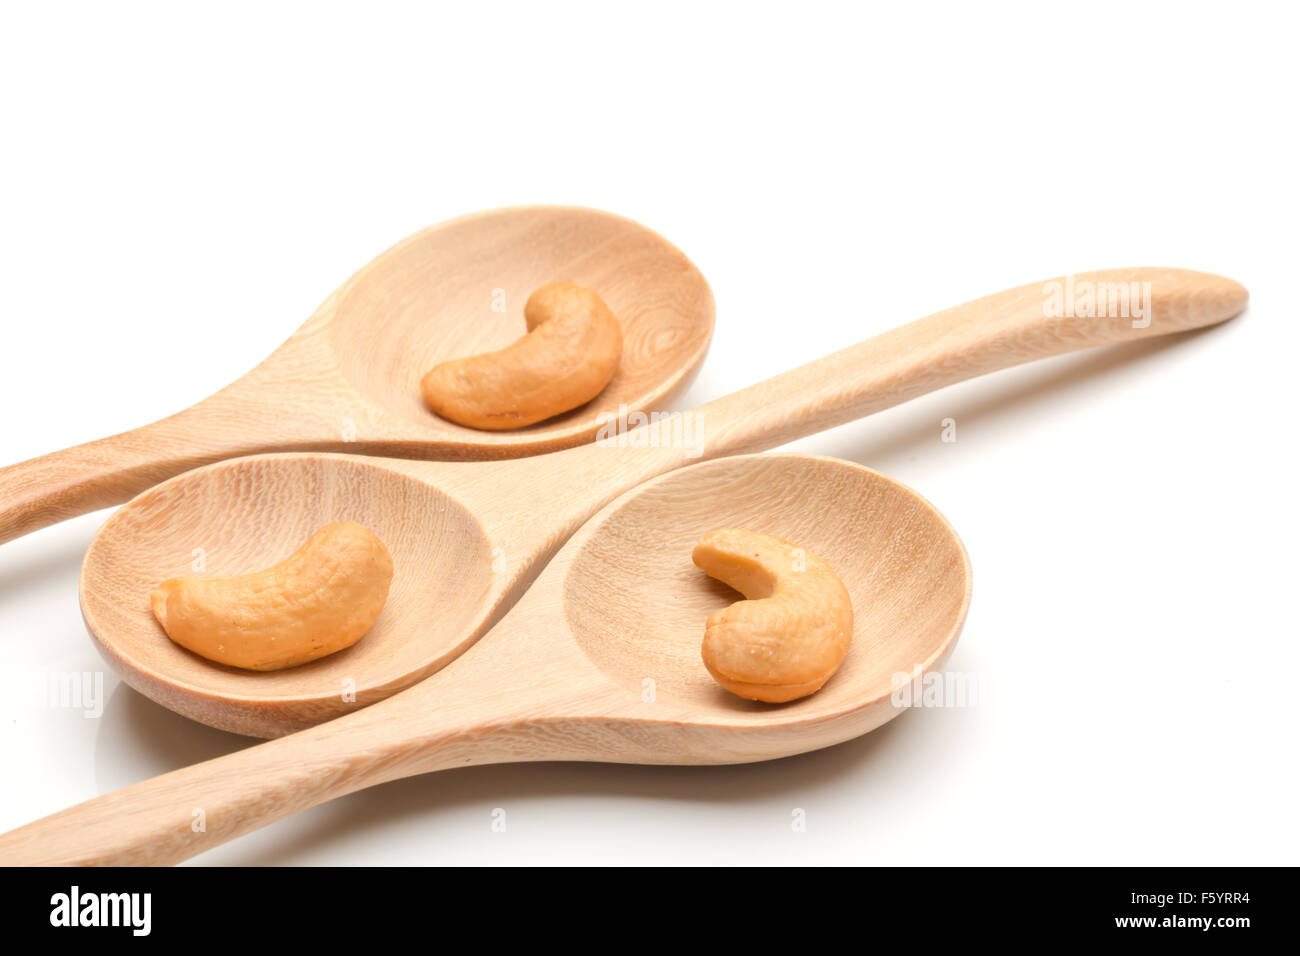 cashew nuts in spoon on wood arrange on white background Stock Photo